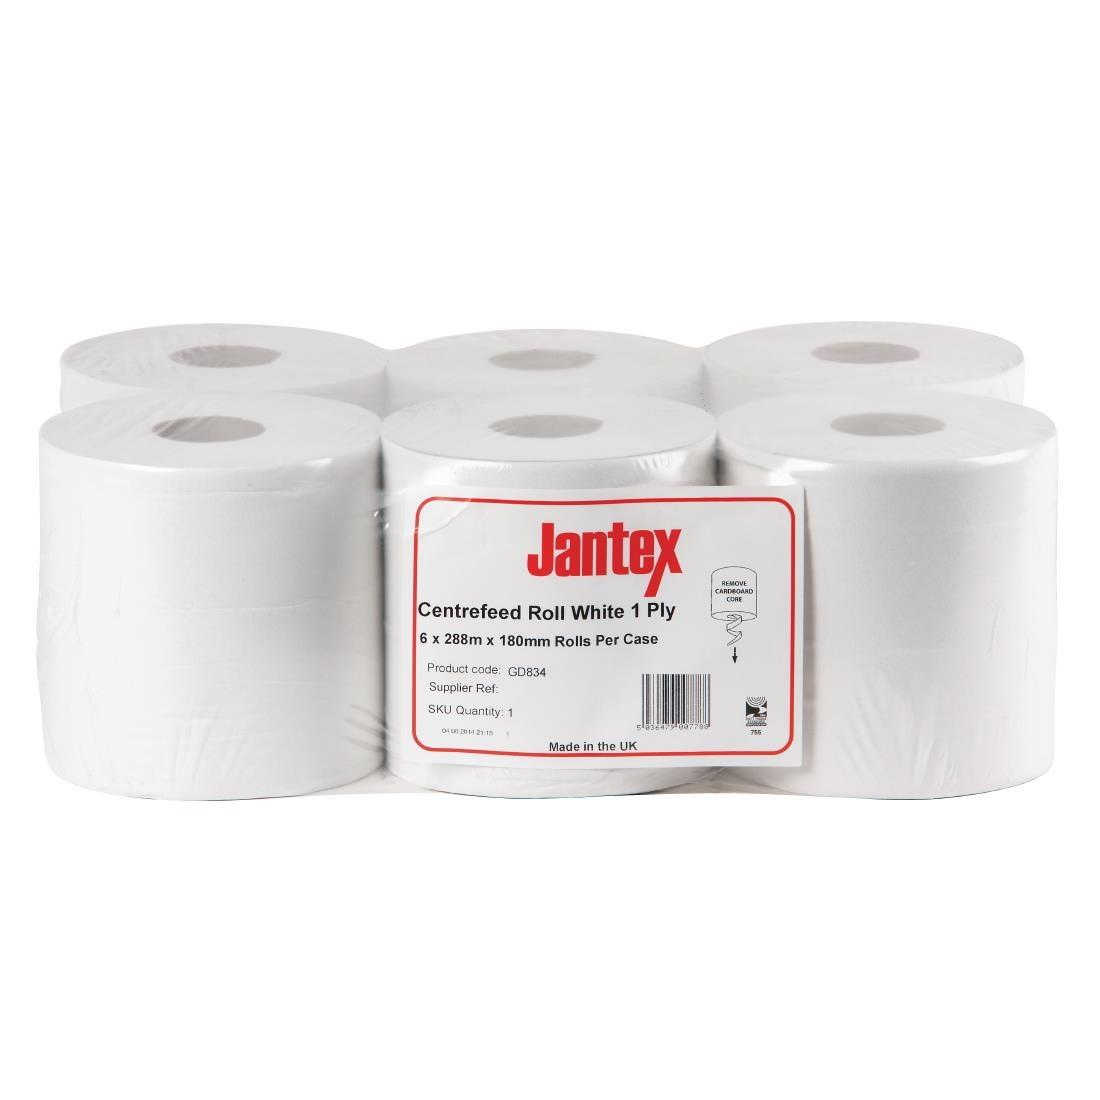 Jantex Centrefeed White Rolls 1-Ply 288m (Pack of 6) - GD834  - 2